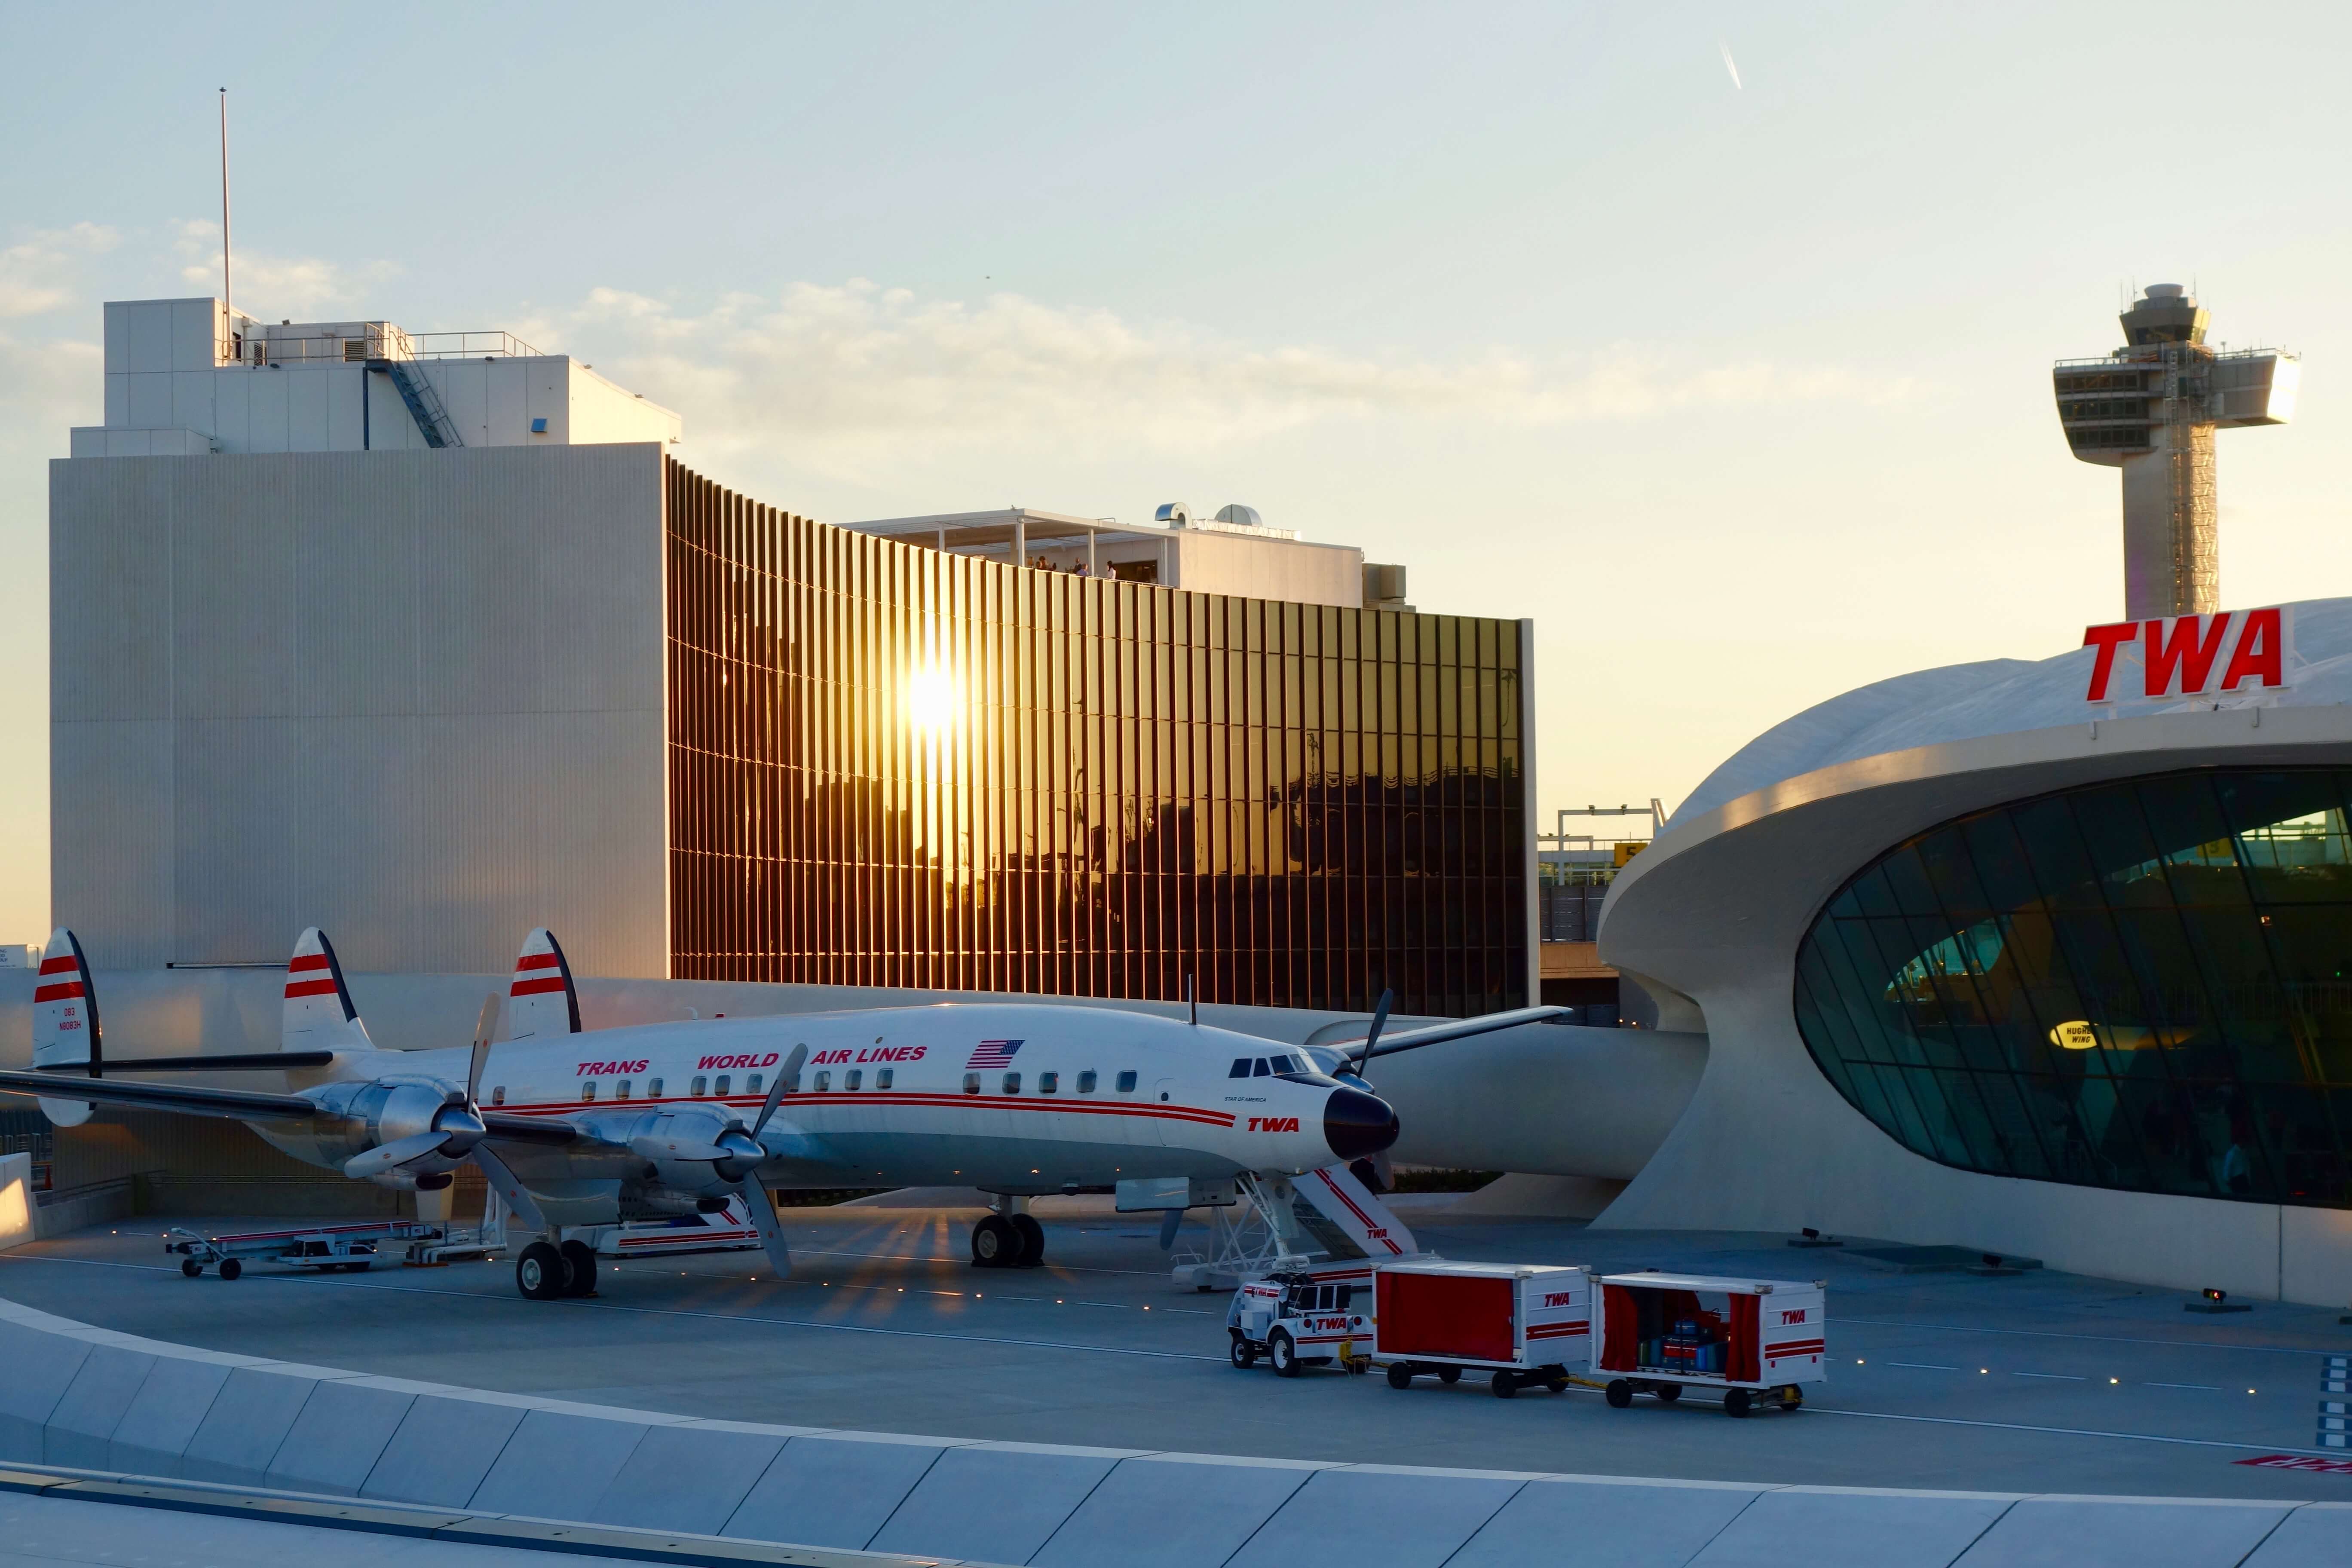 Outside view from JFK Terminal 5 looking toward the iconic Eero Saarinen terminal building completed in 1962 for TWA. In the forefront is a vintage TWA Super Constellation, also know as the "Connie."